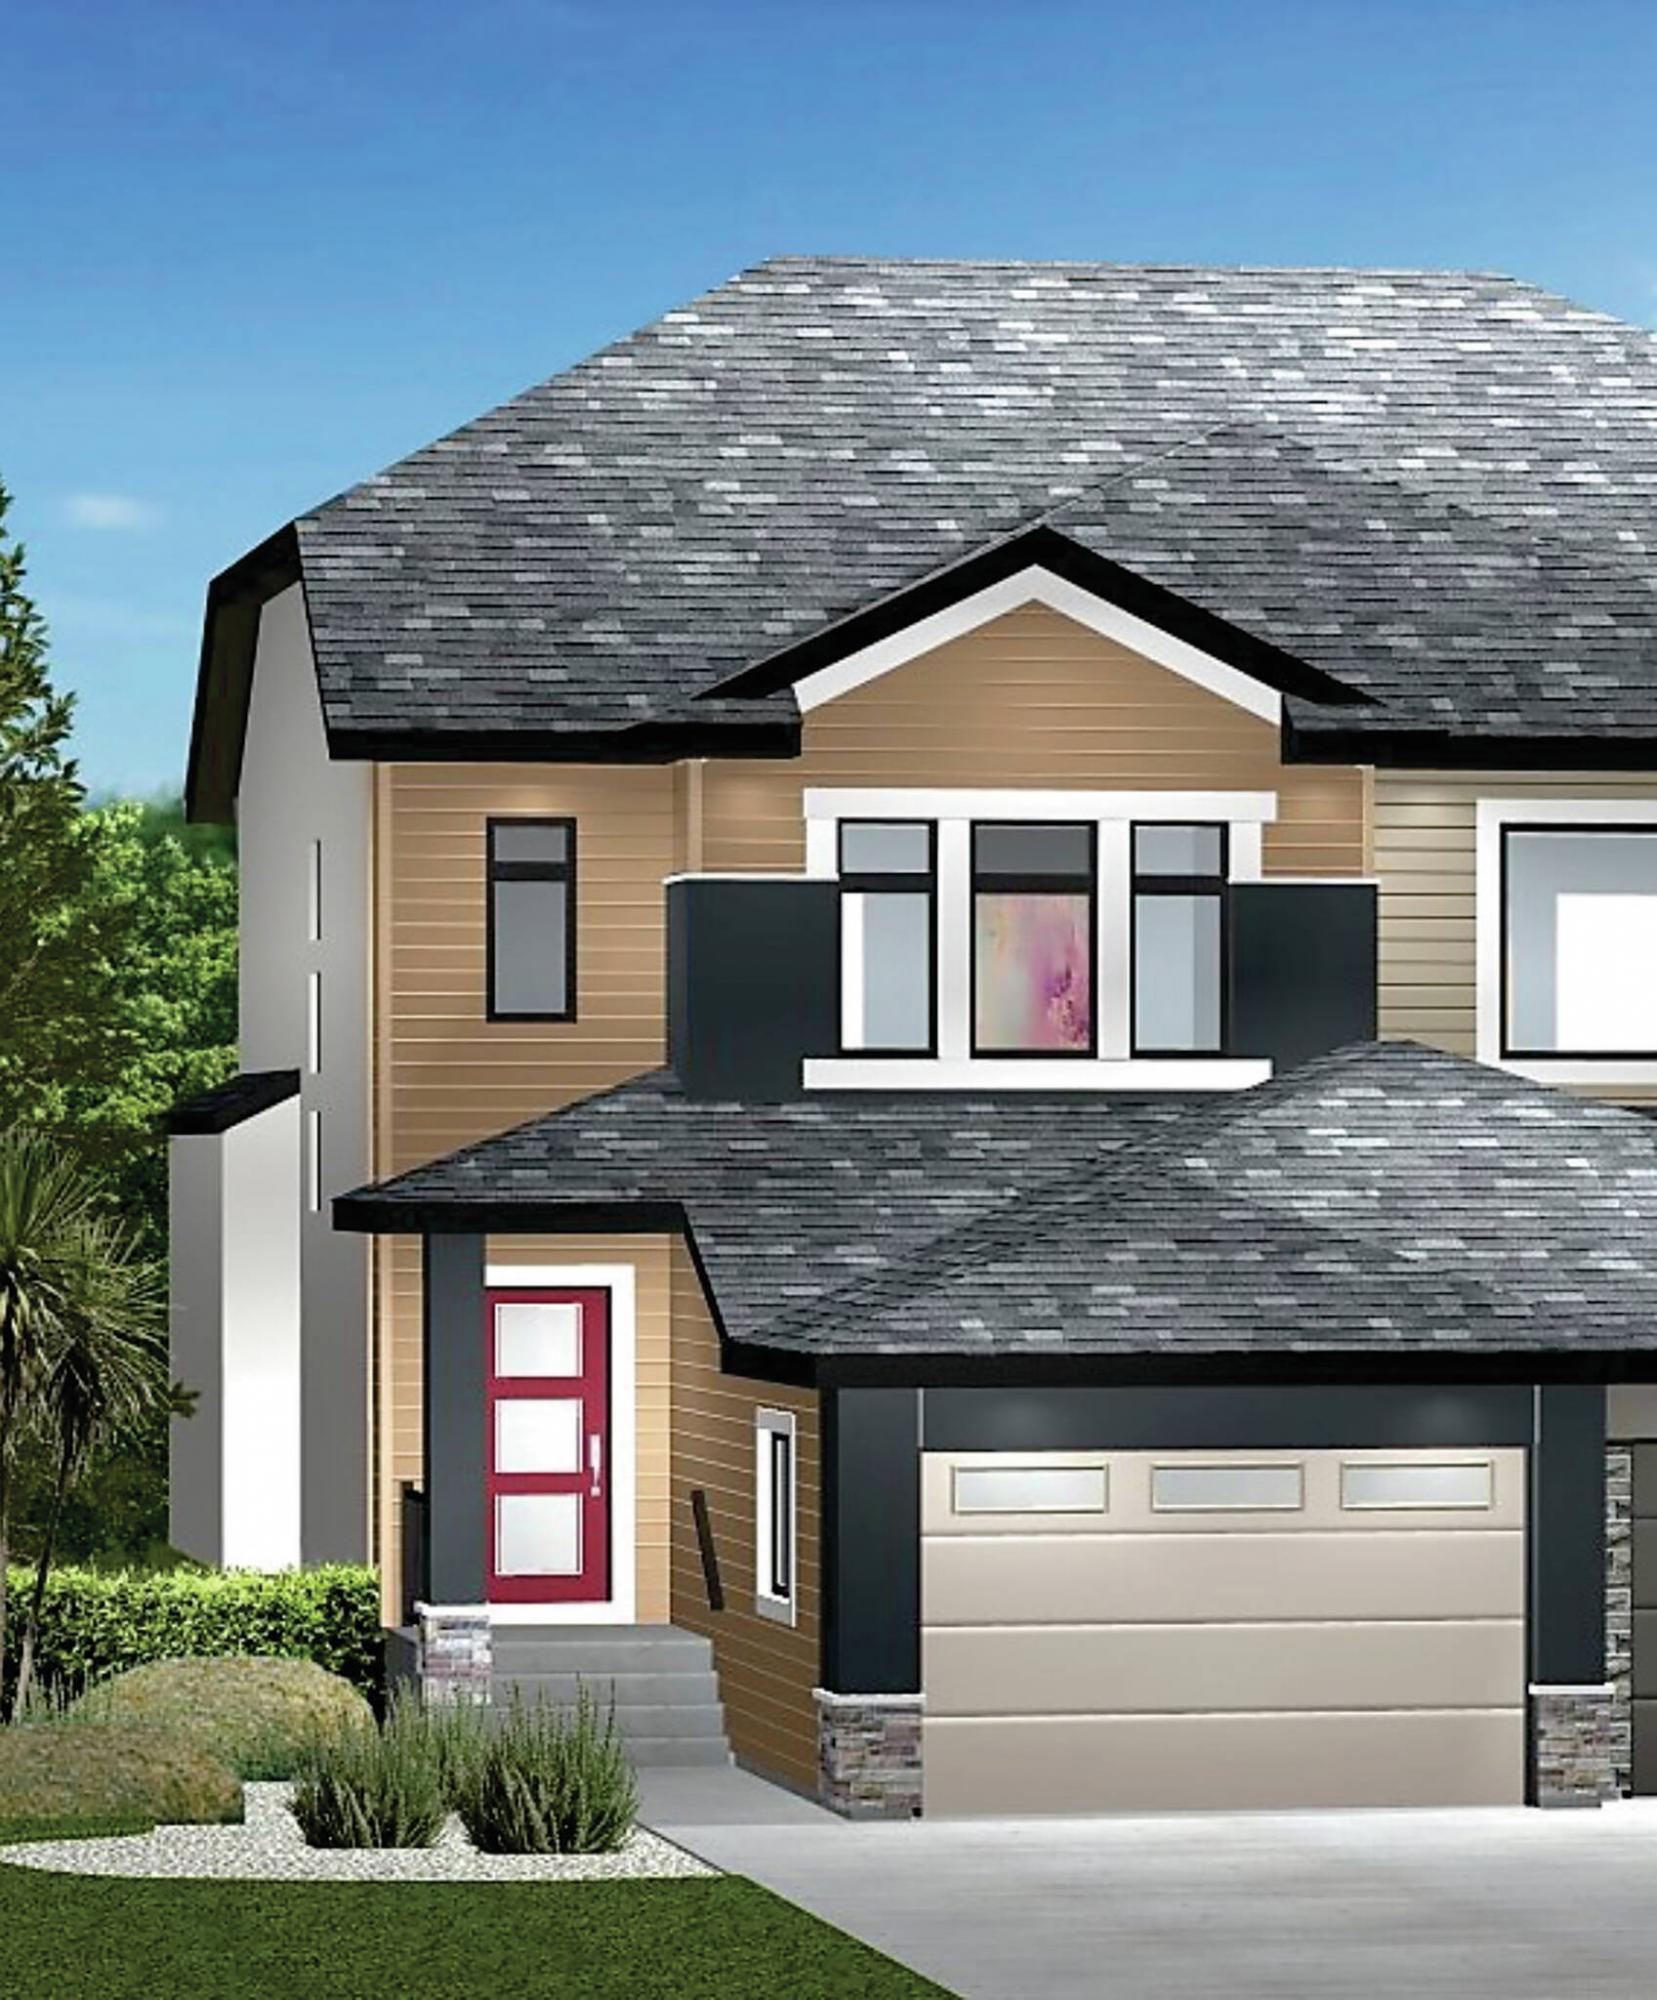 <p>Artist rendering shows the attractive curb appeal found in this attached two-storey home.</p>